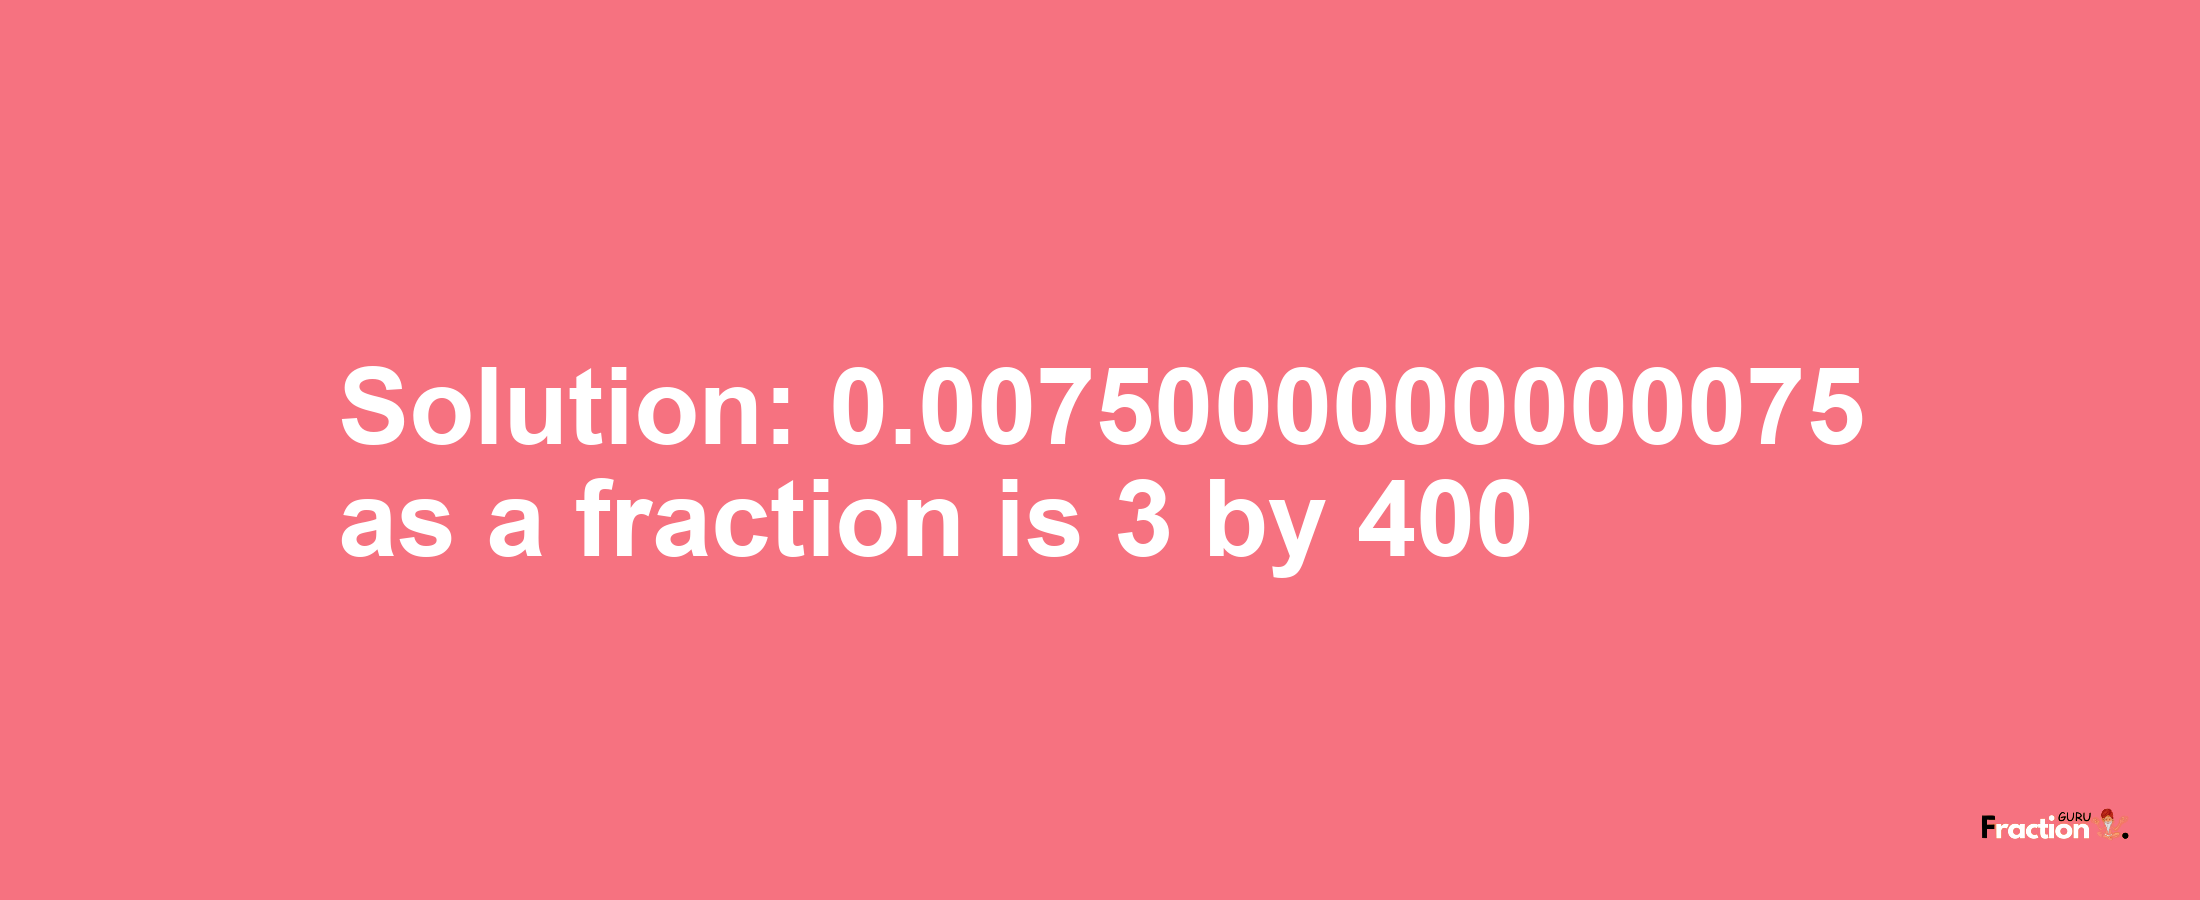 Solution:0.0075000000000075 as a fraction is 3/400